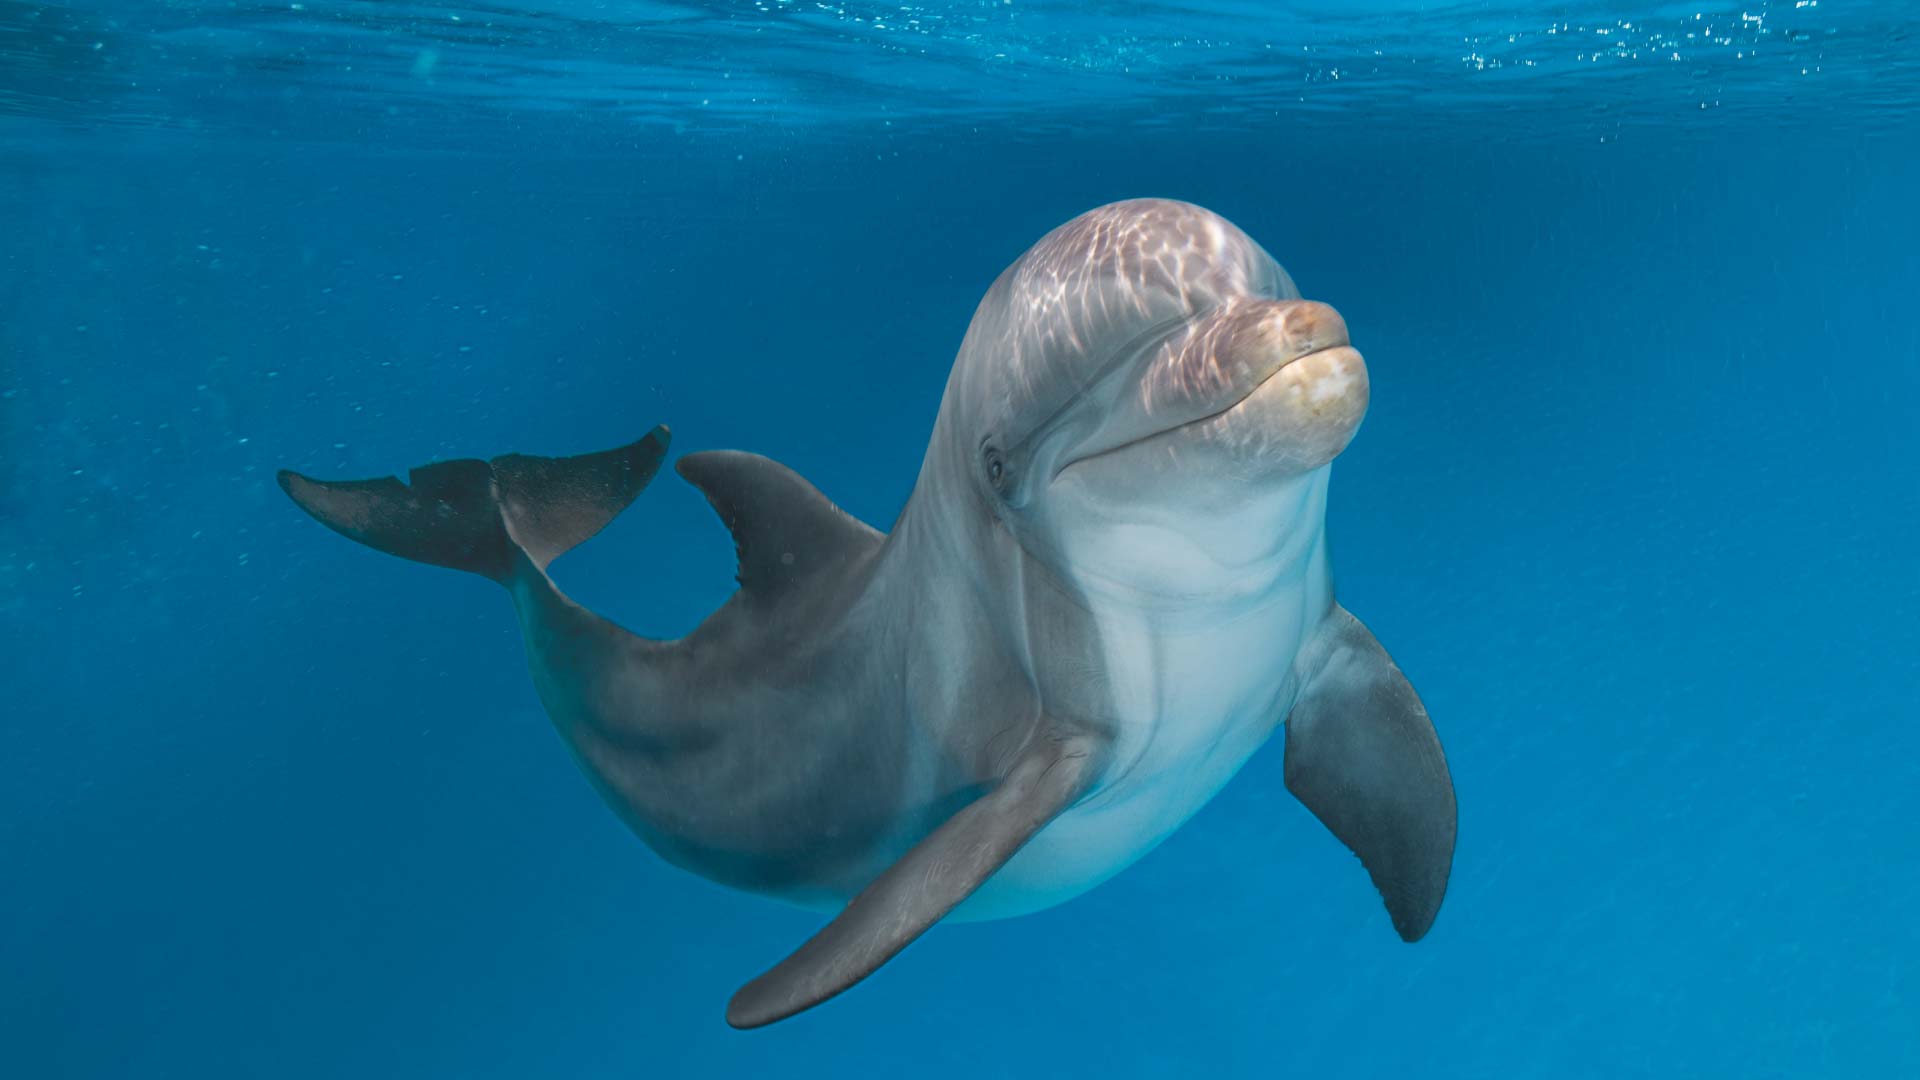 A cute dolphin underwater